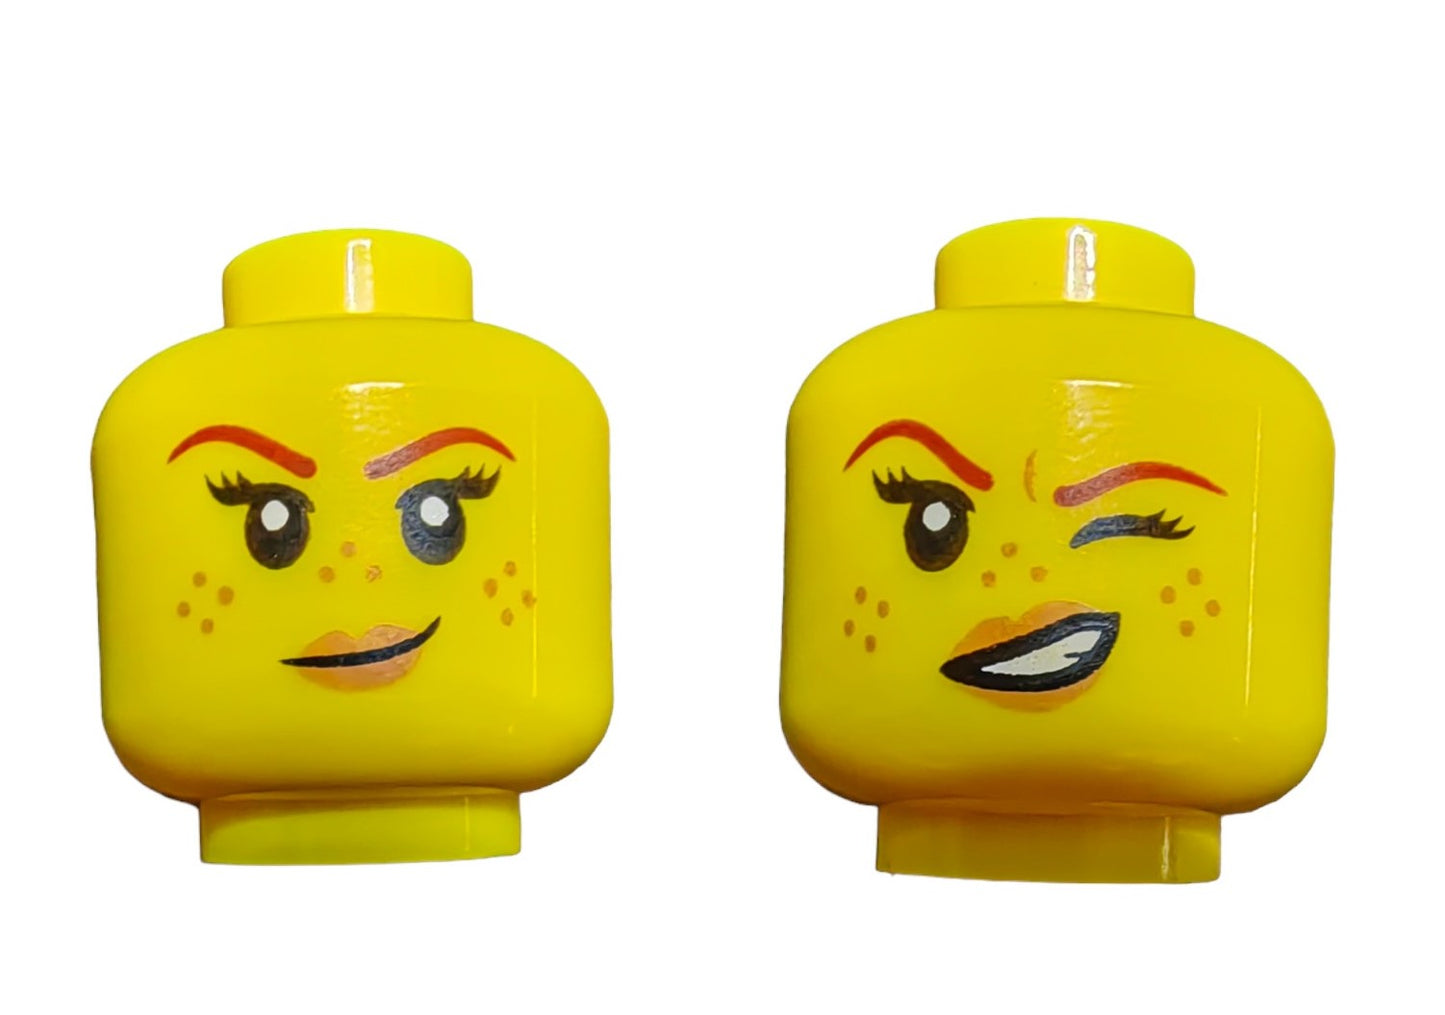 LEGO Head, Double Faced Spotty with a Cheeky Smirk and Wink - UB1017